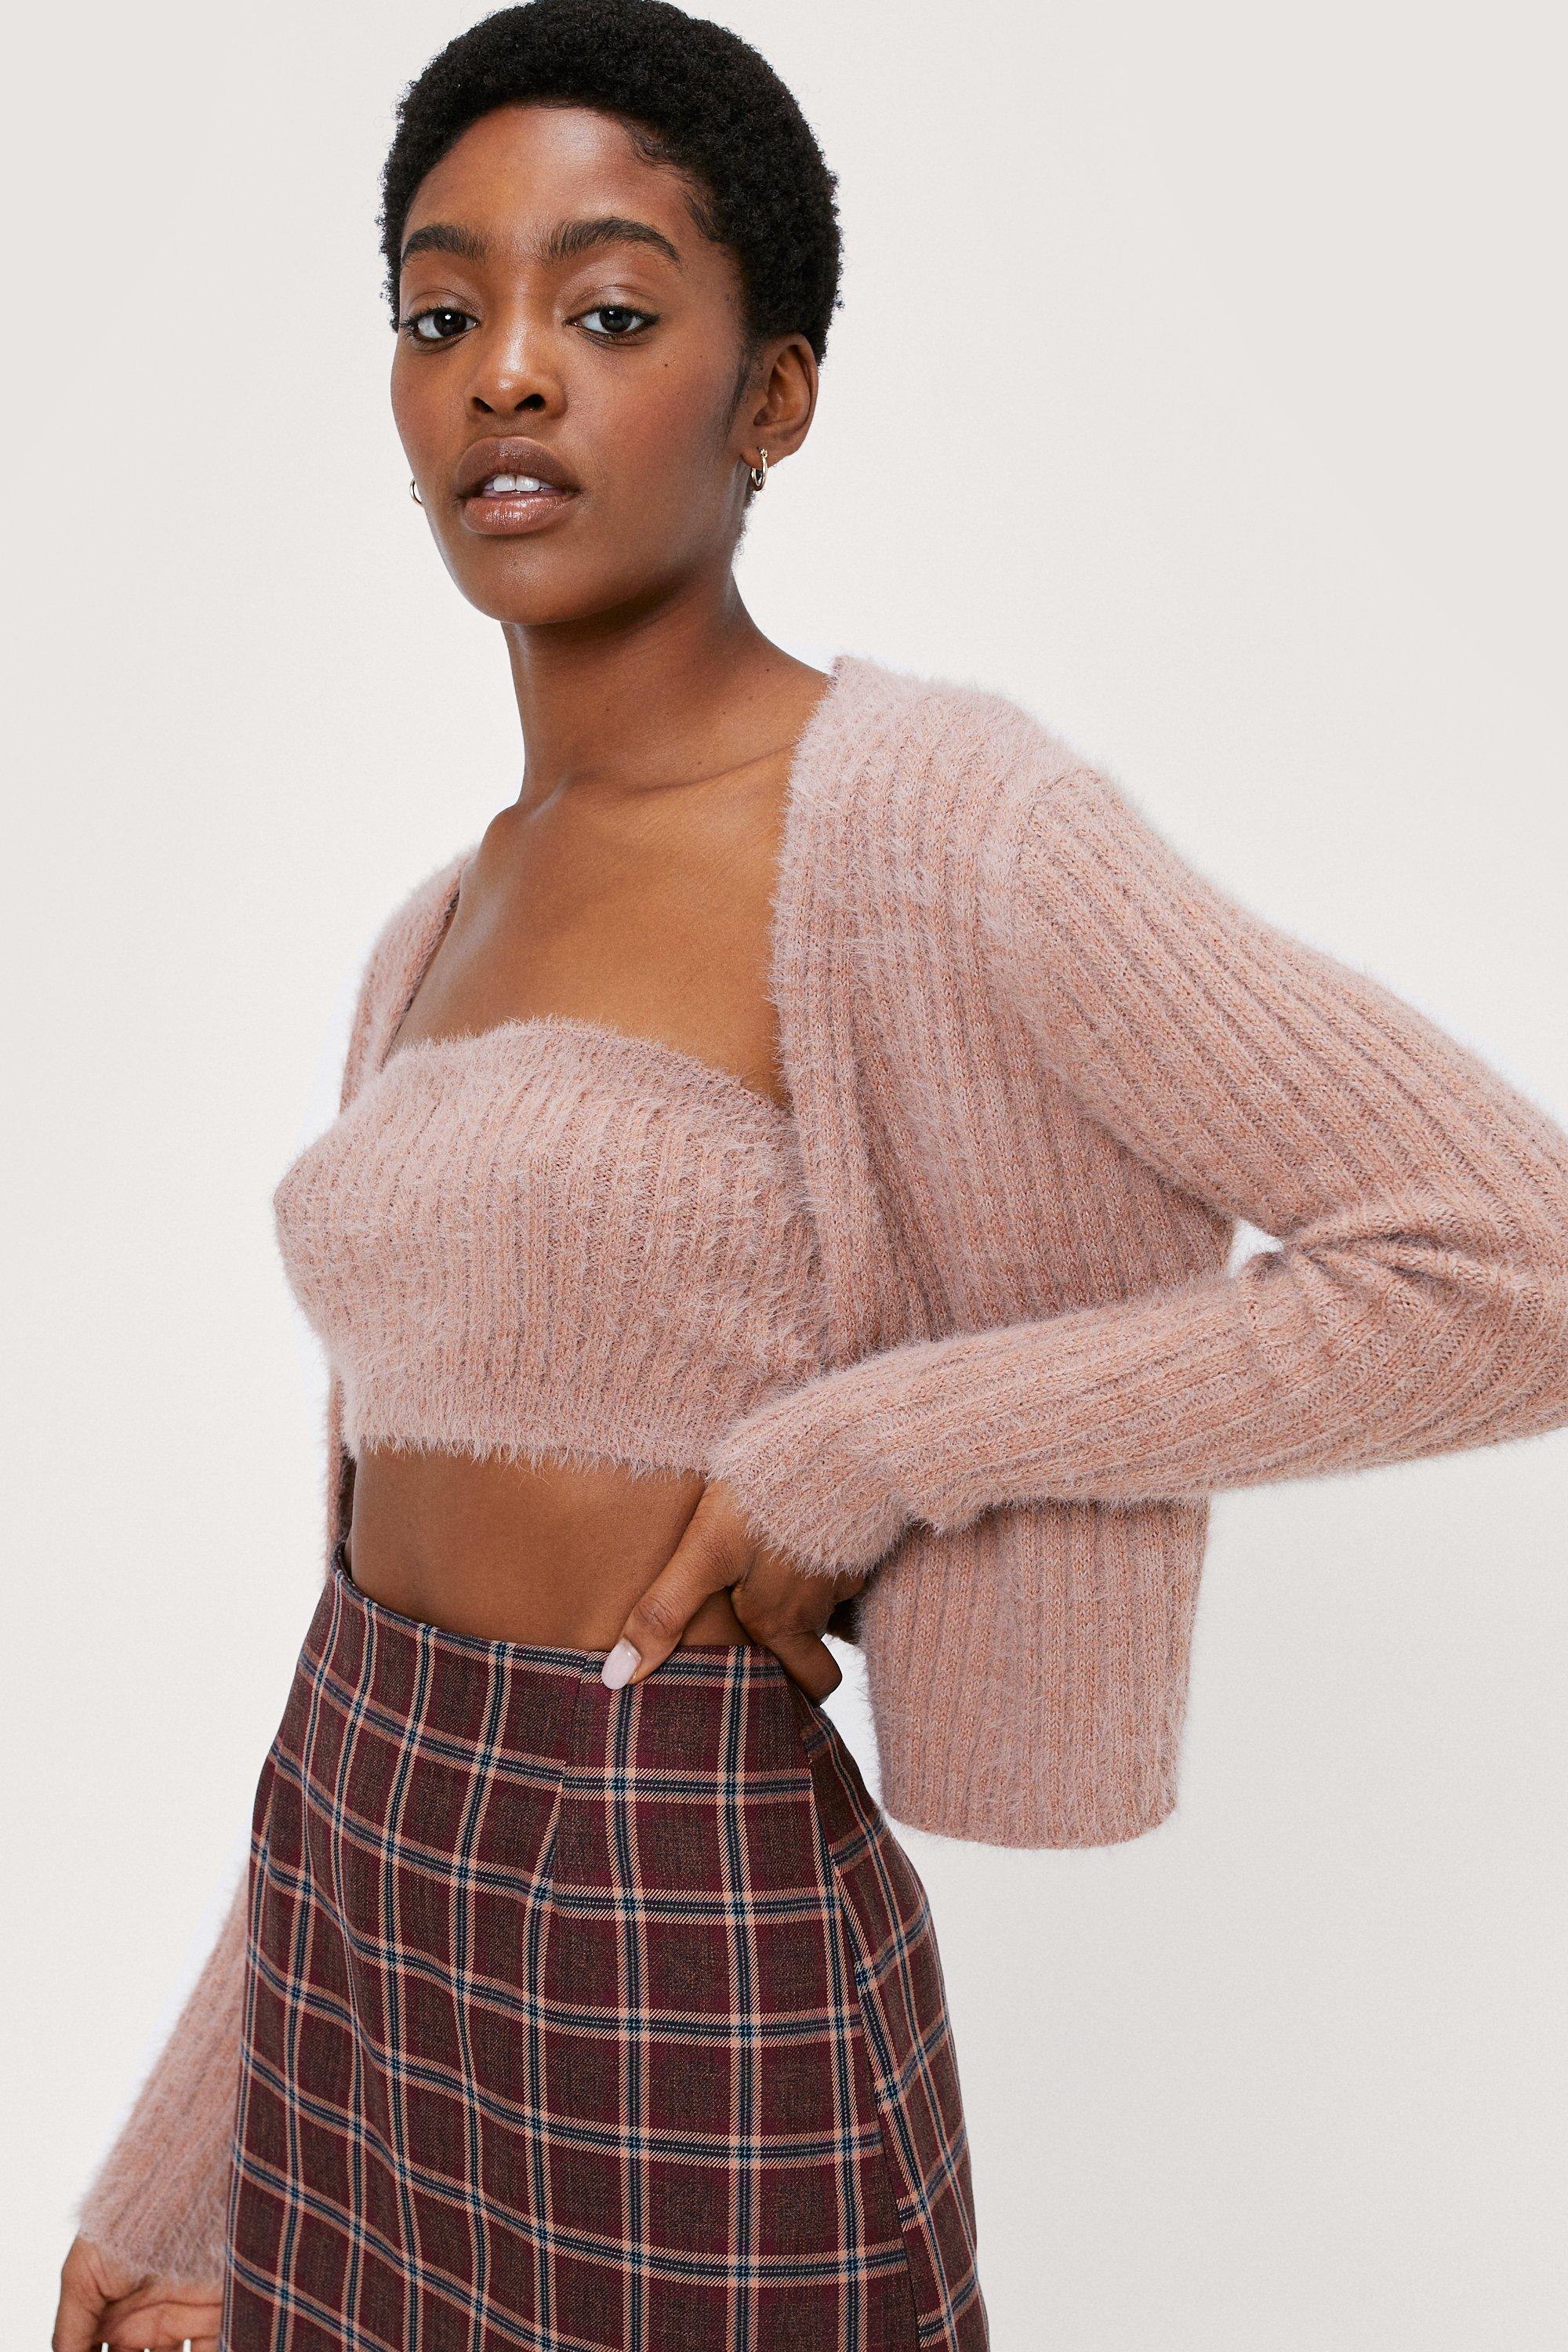 ASOS Fluffy Cropped Cardigan in Pink